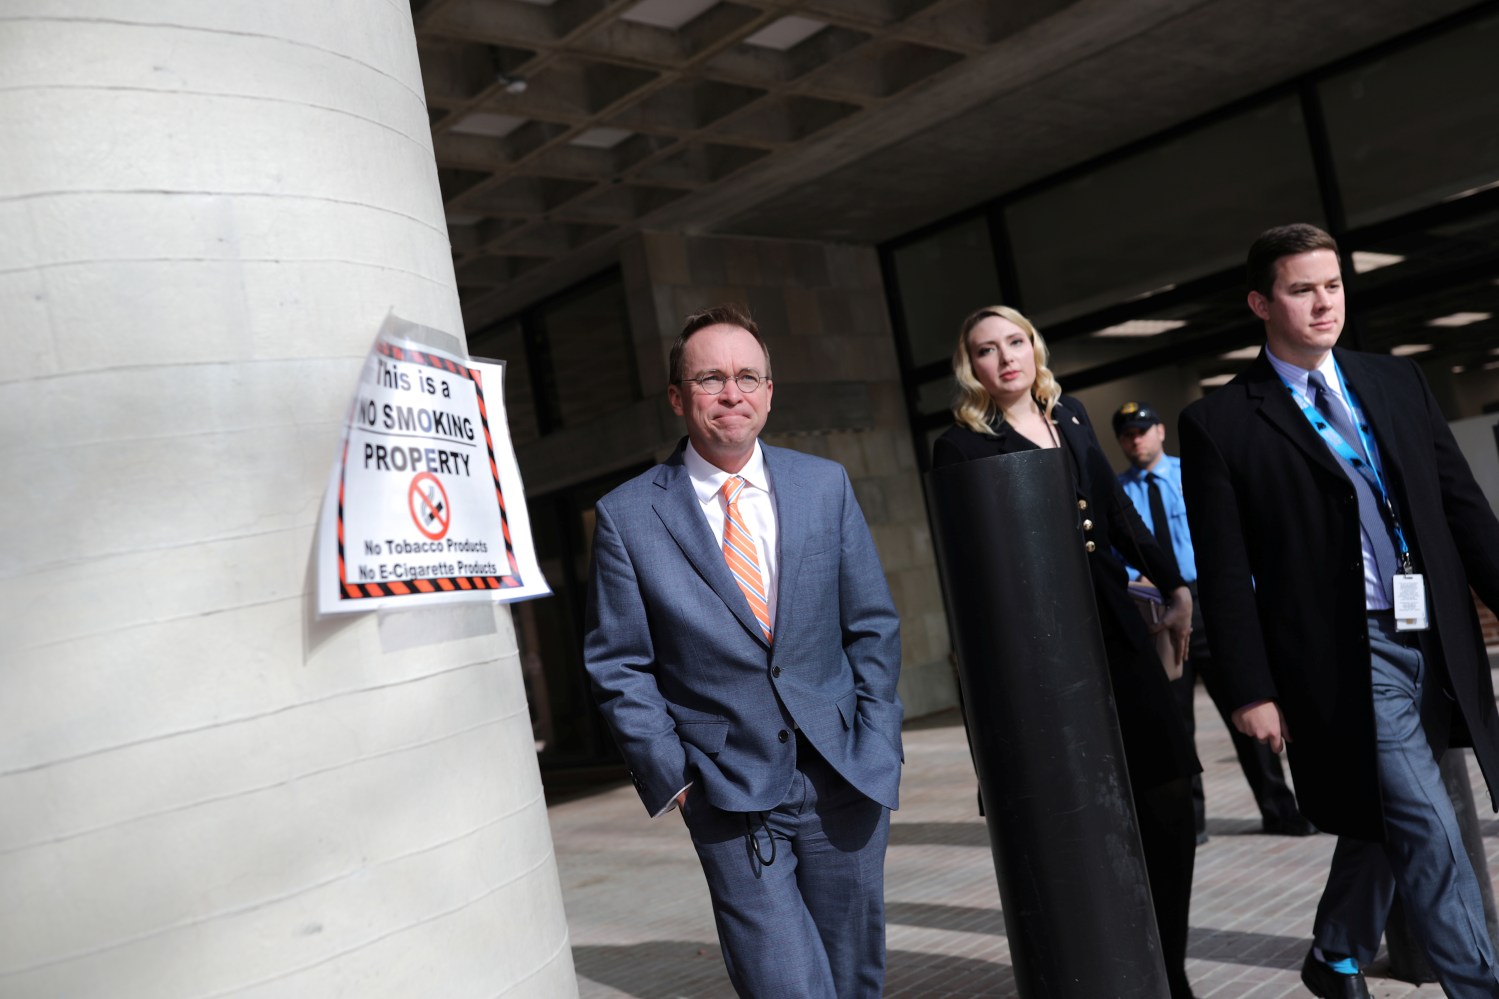 Office of Management and Budget Director Mick Mulvaney leaves the Consumer Financial Protection Bureau (CFPB) building after a meeting in downtown Washington D.C.